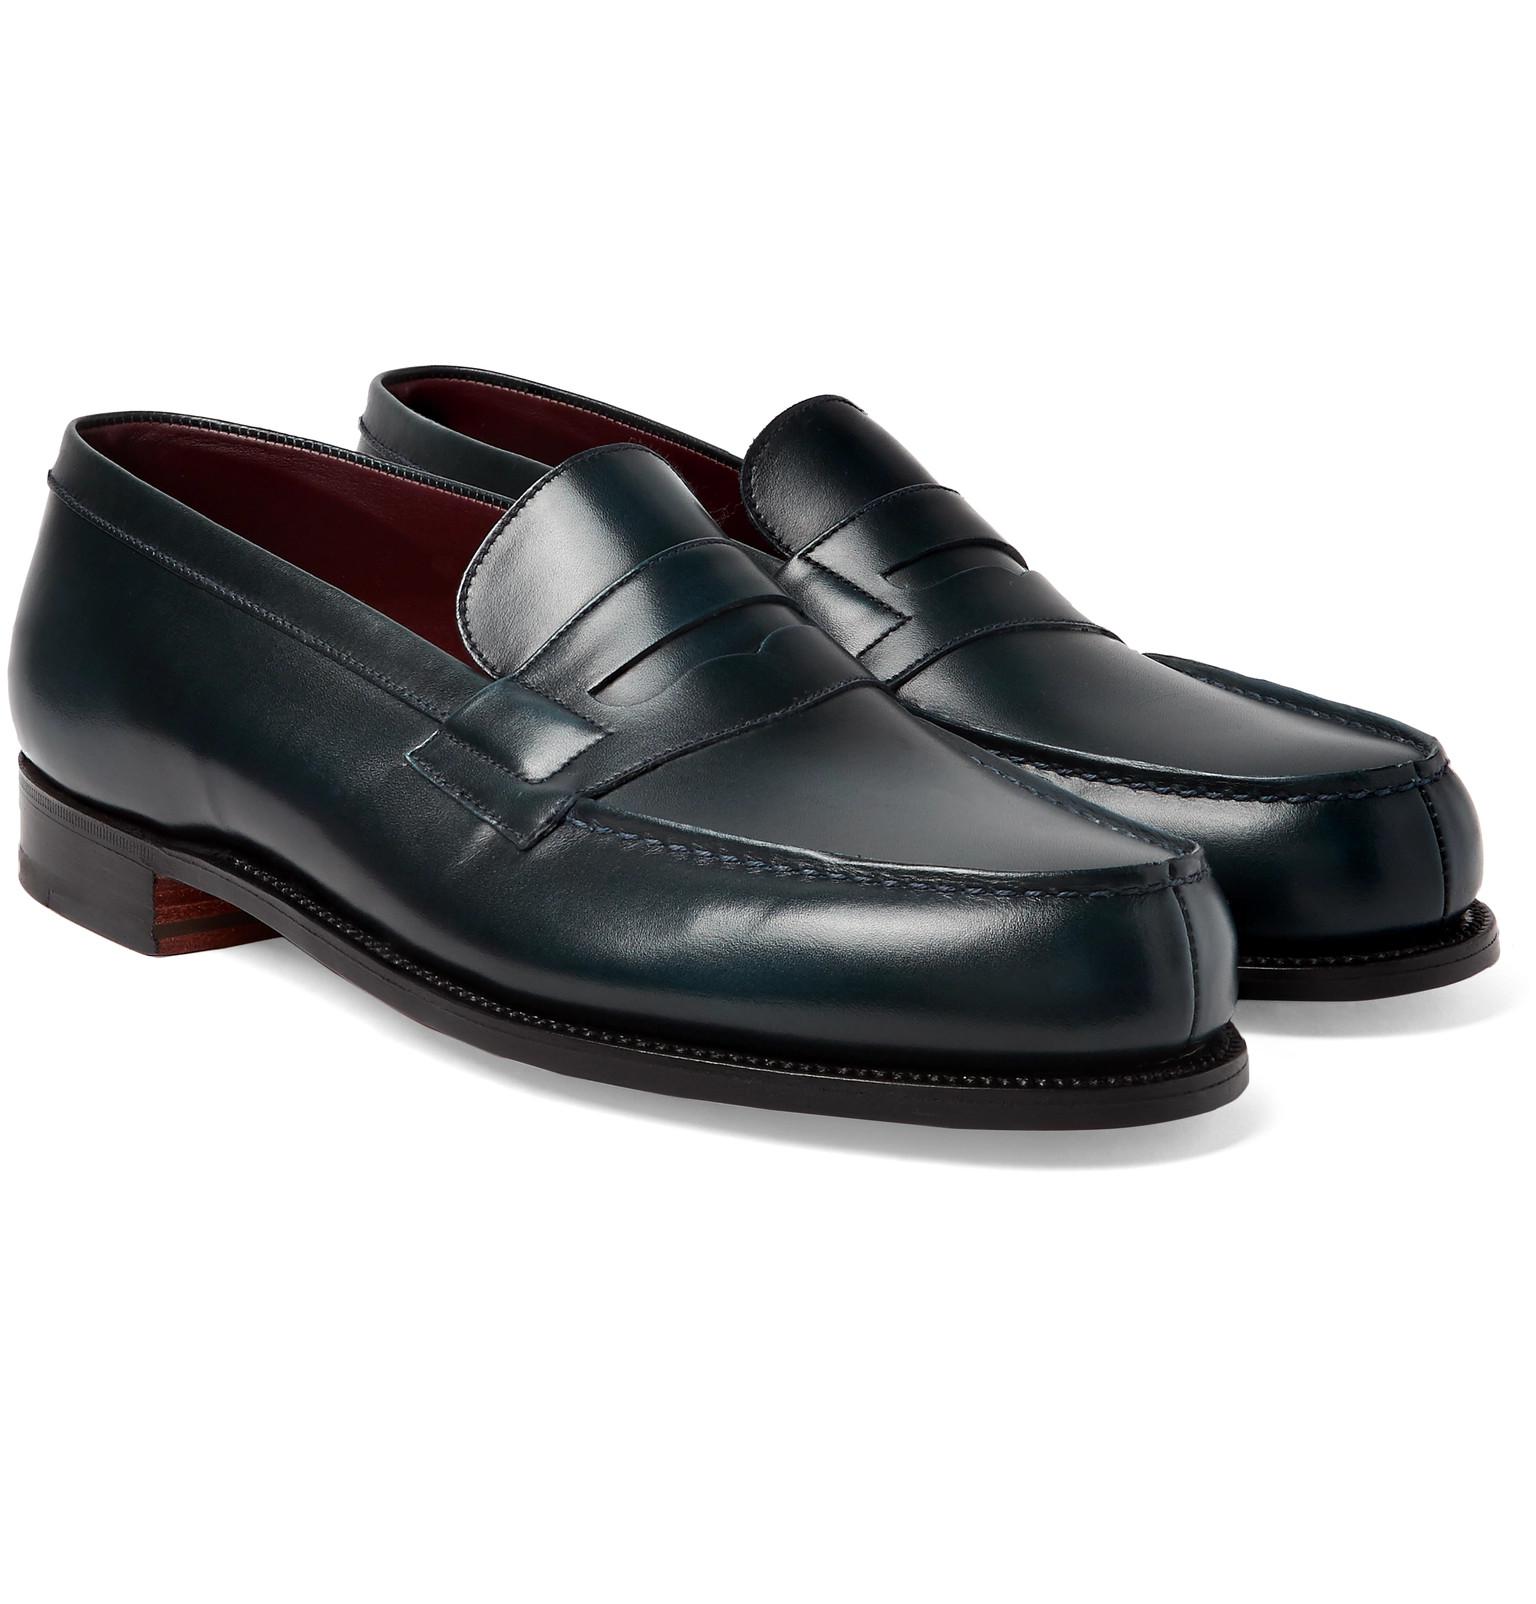 J.M. Weston Leather Penny Loafers in Teal (Black) for Men - Lyst